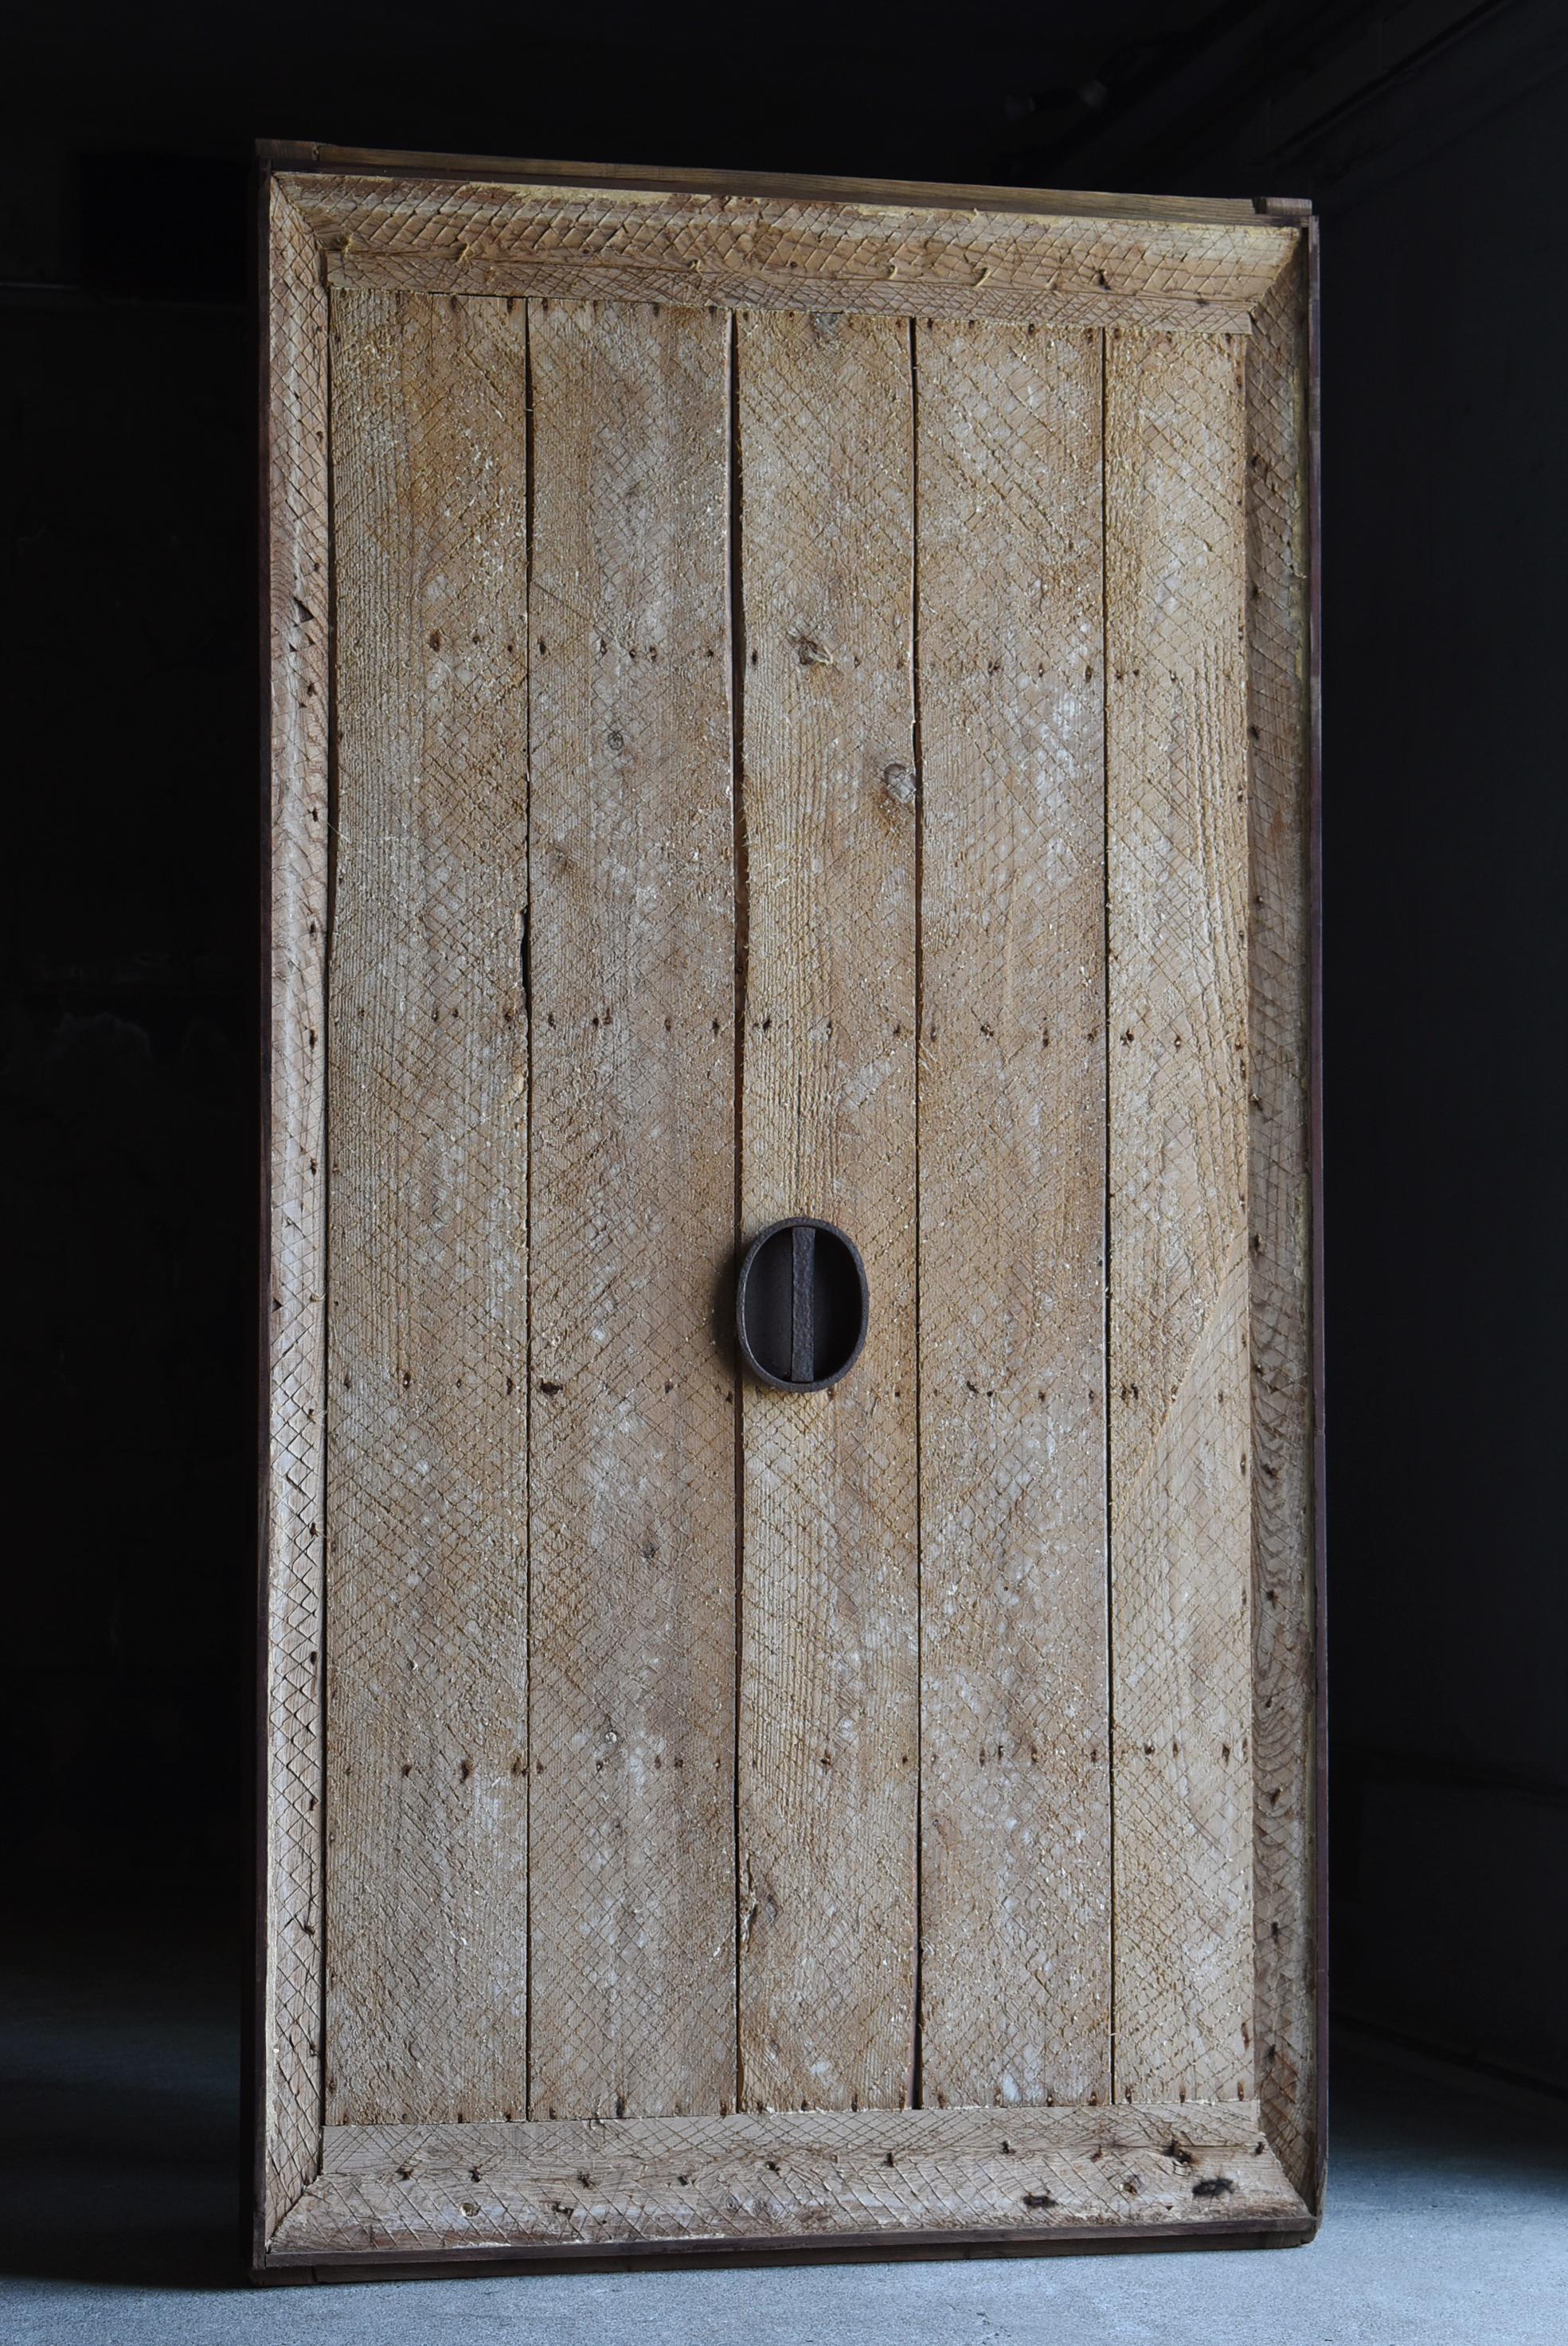 This is a large sliding door from a very old Japanese warehouse.
This door was made in the Meiji Era. (1860s-1900s).
It is made of zelkova and cedar wood with iron handles.

It was plastered at the time, but the plaster has peeled off, exposing the